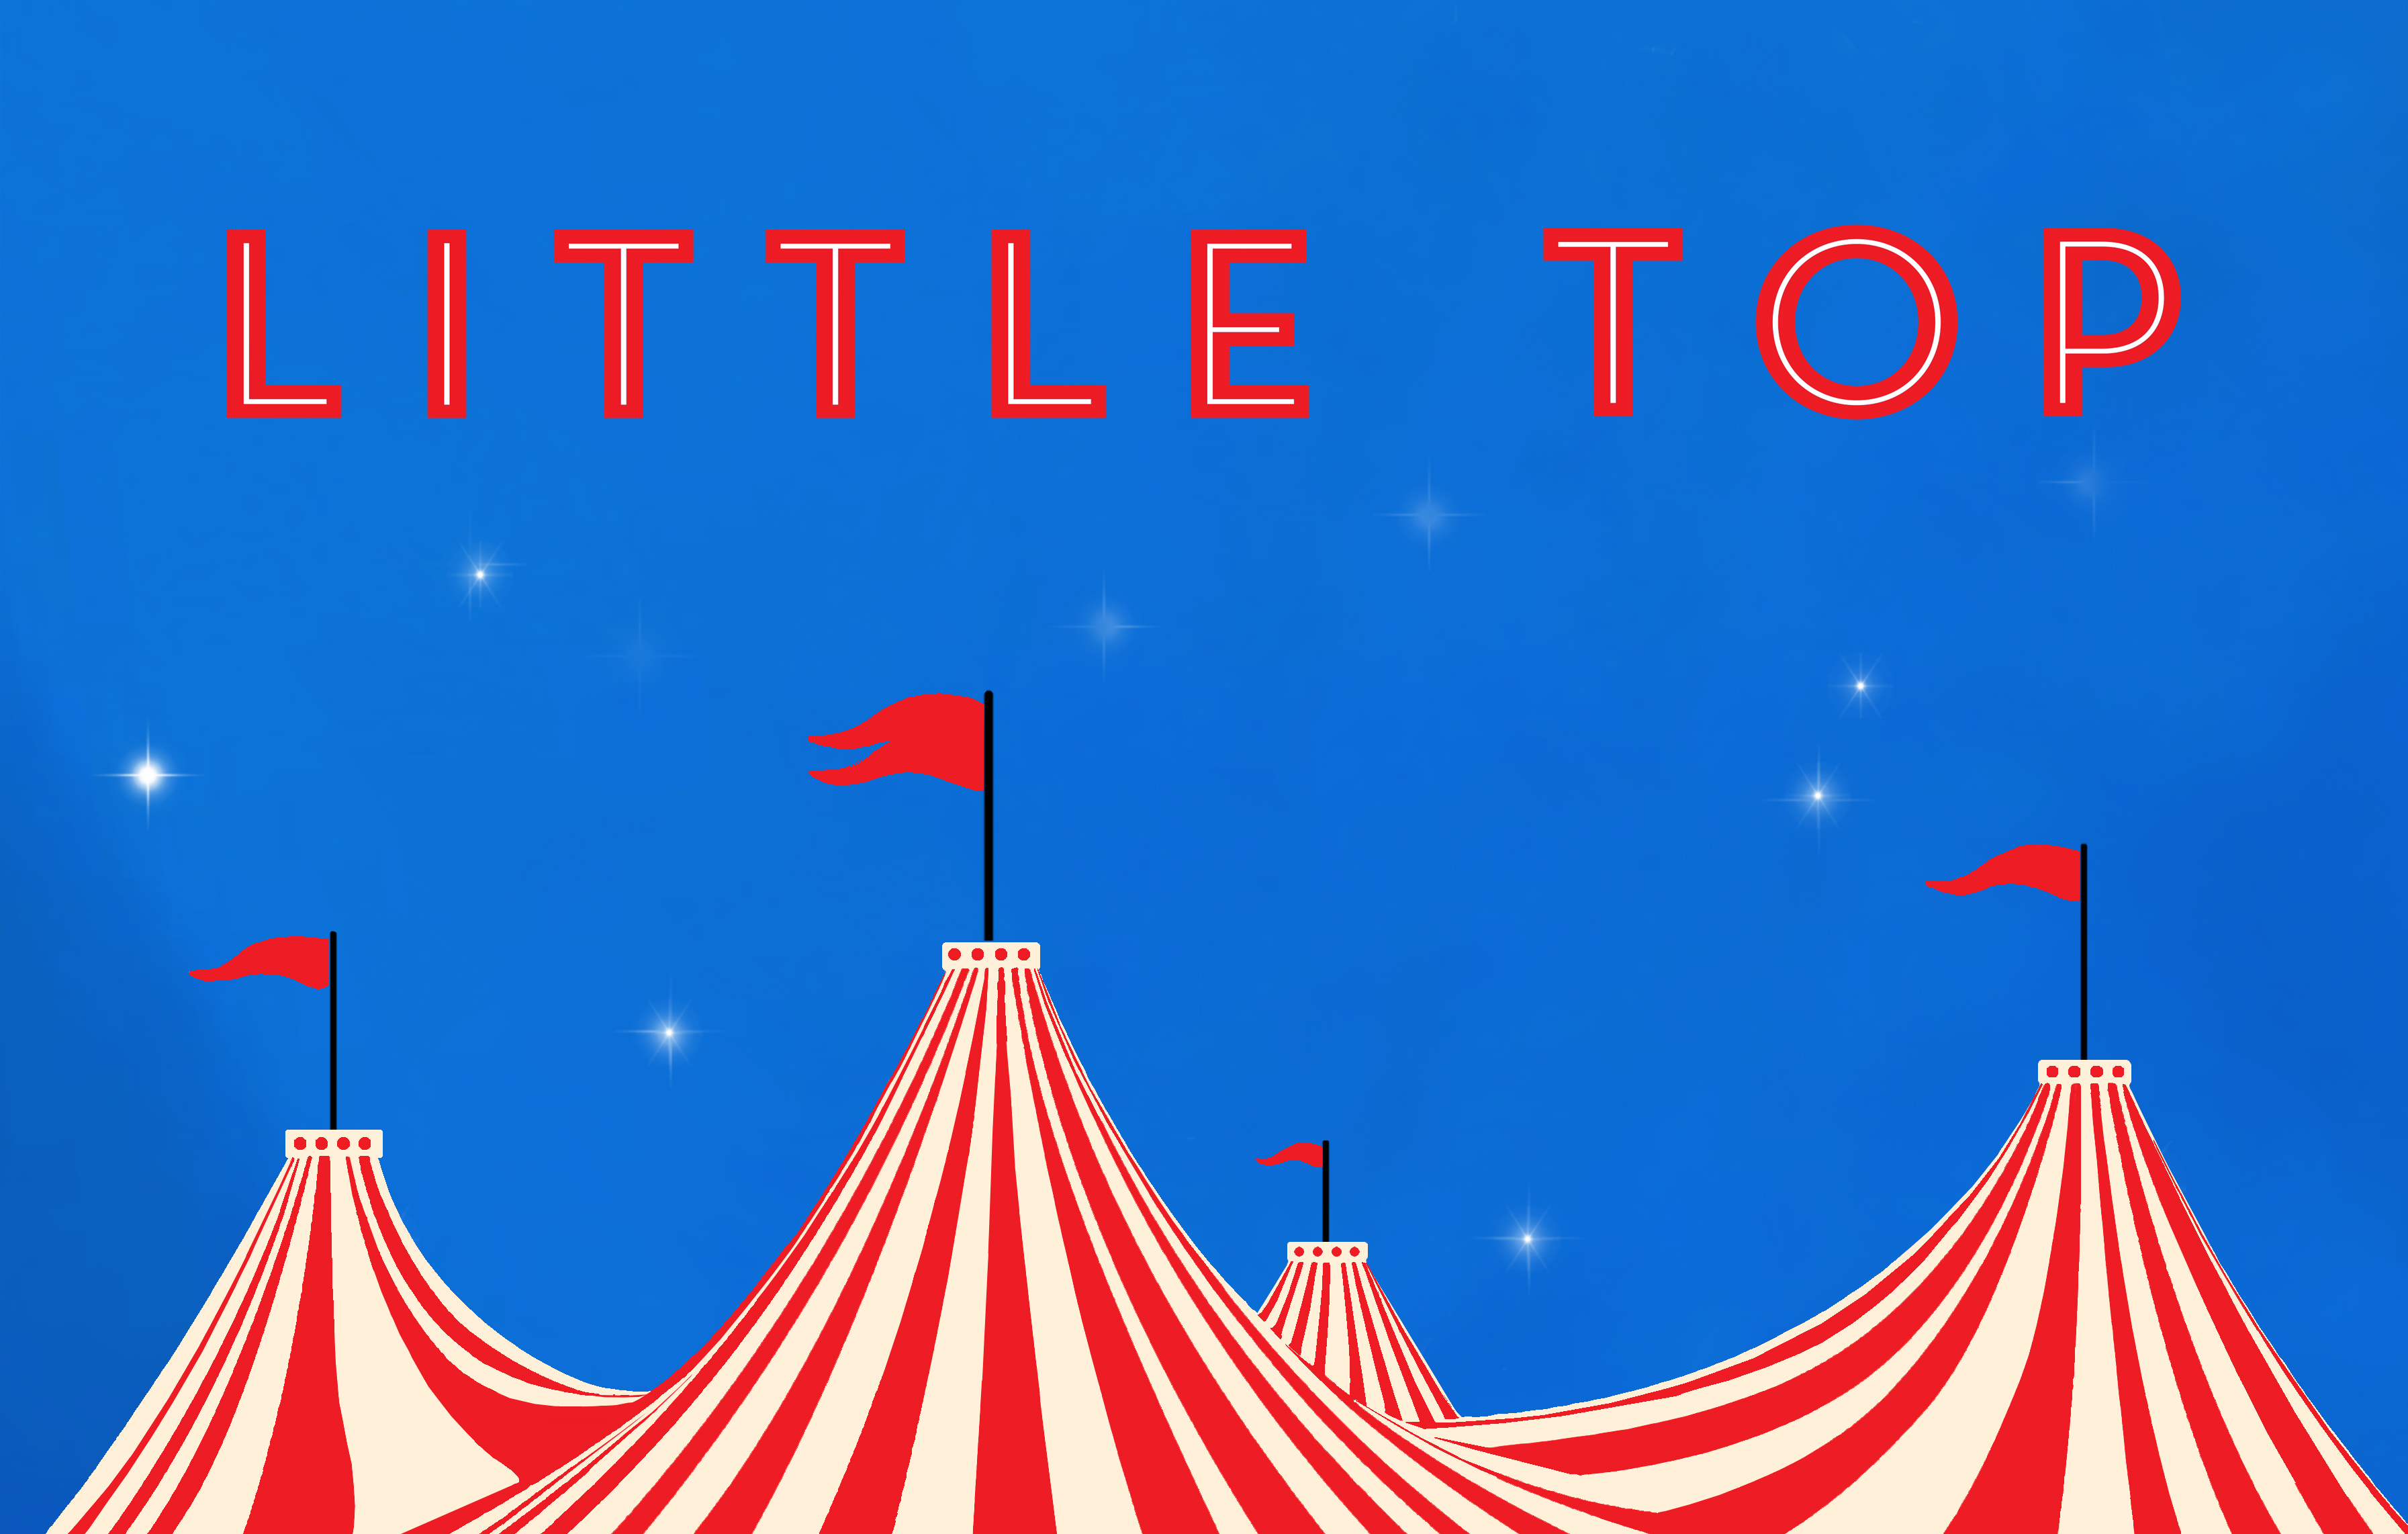 Little Top comes to Forres this weekend.